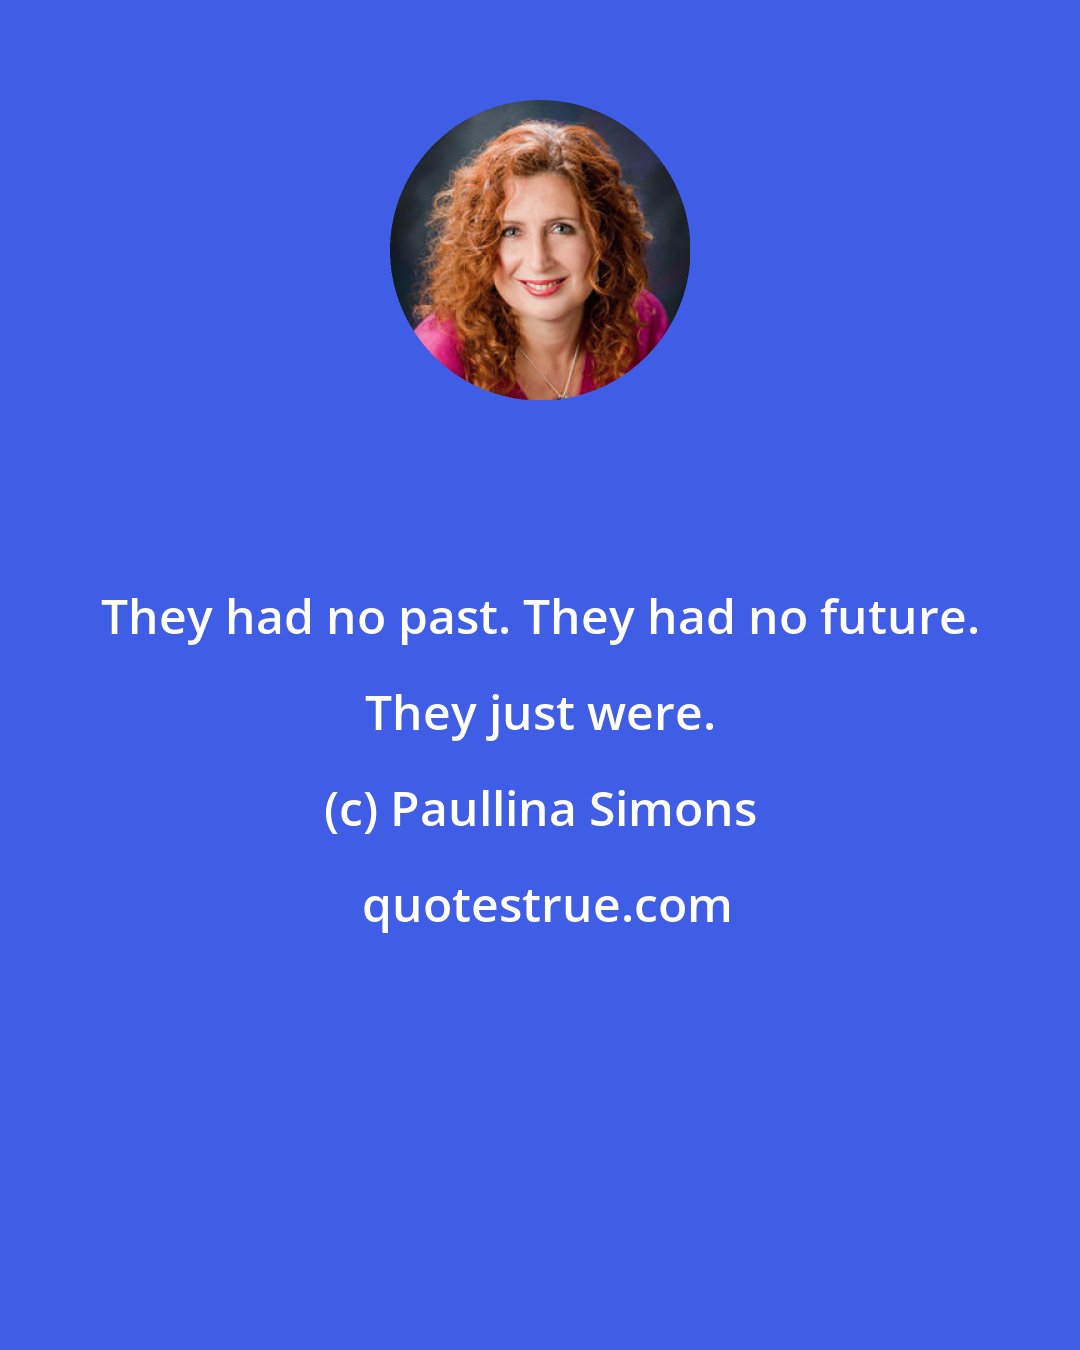 Paullina Simons: They had no past. They had no future. They just were.